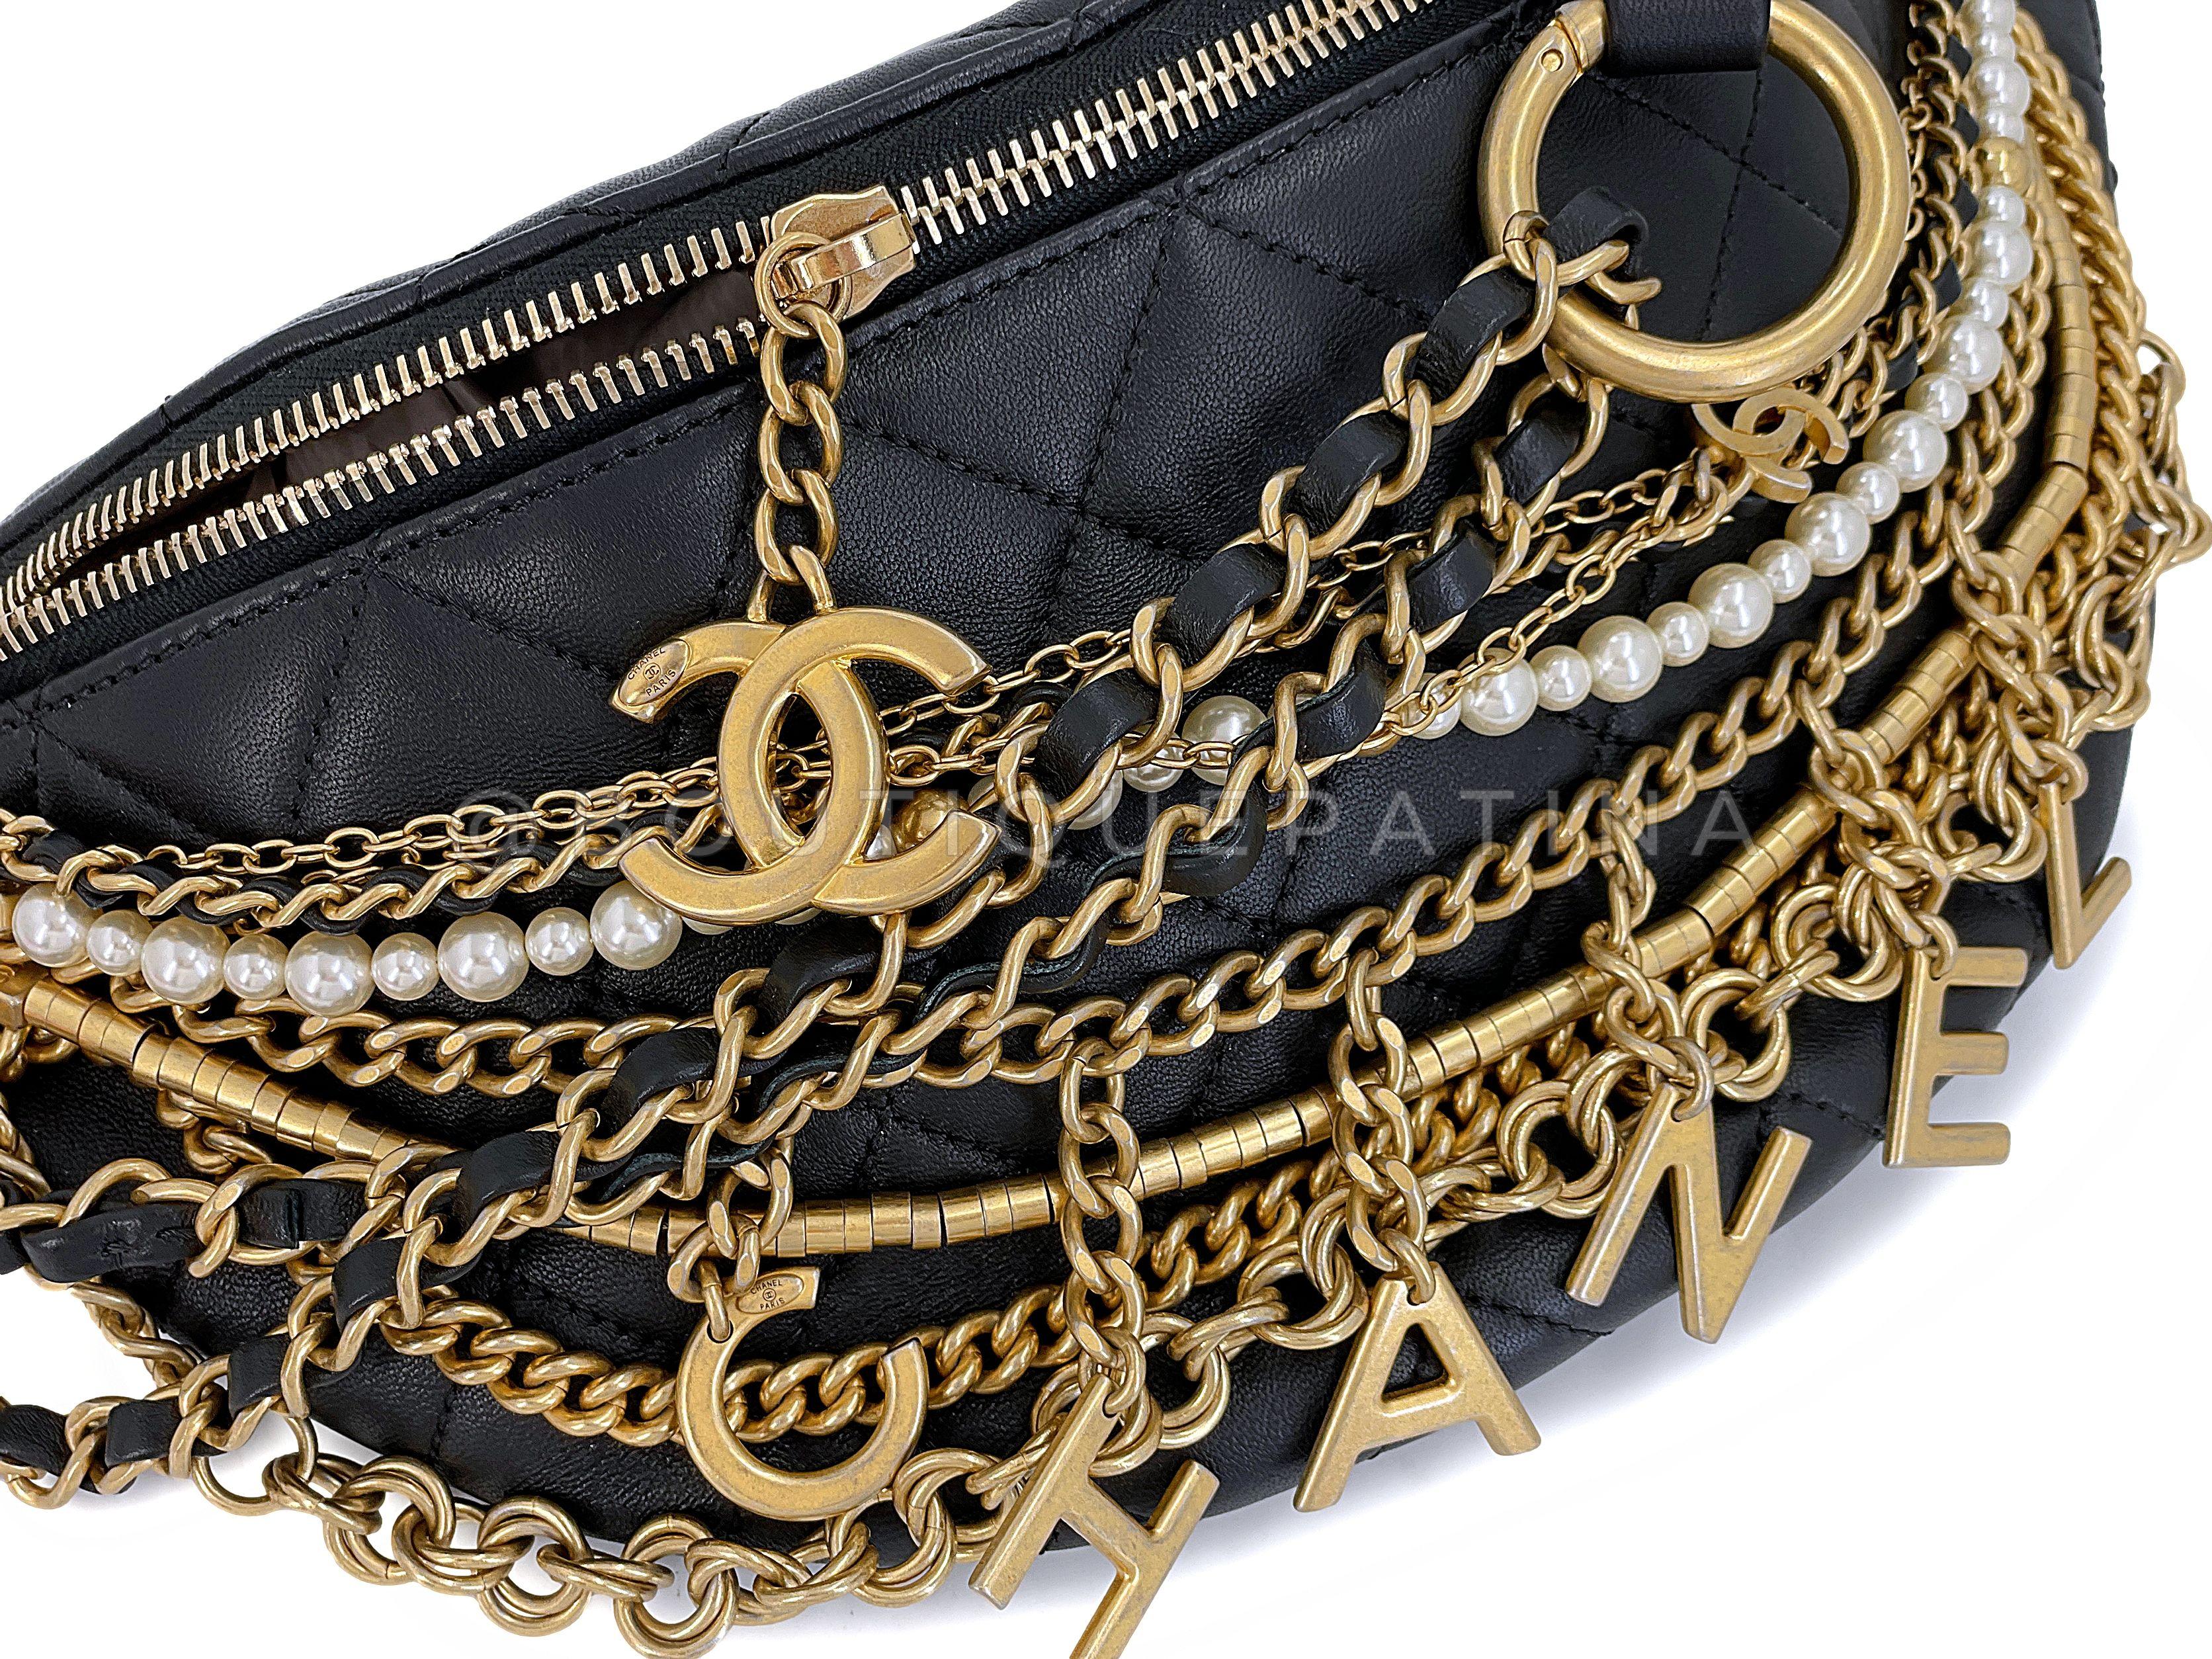 Chanel 19A Black All About Chains Pearl Sac Fanny Pack GHW 67686 en vente 2